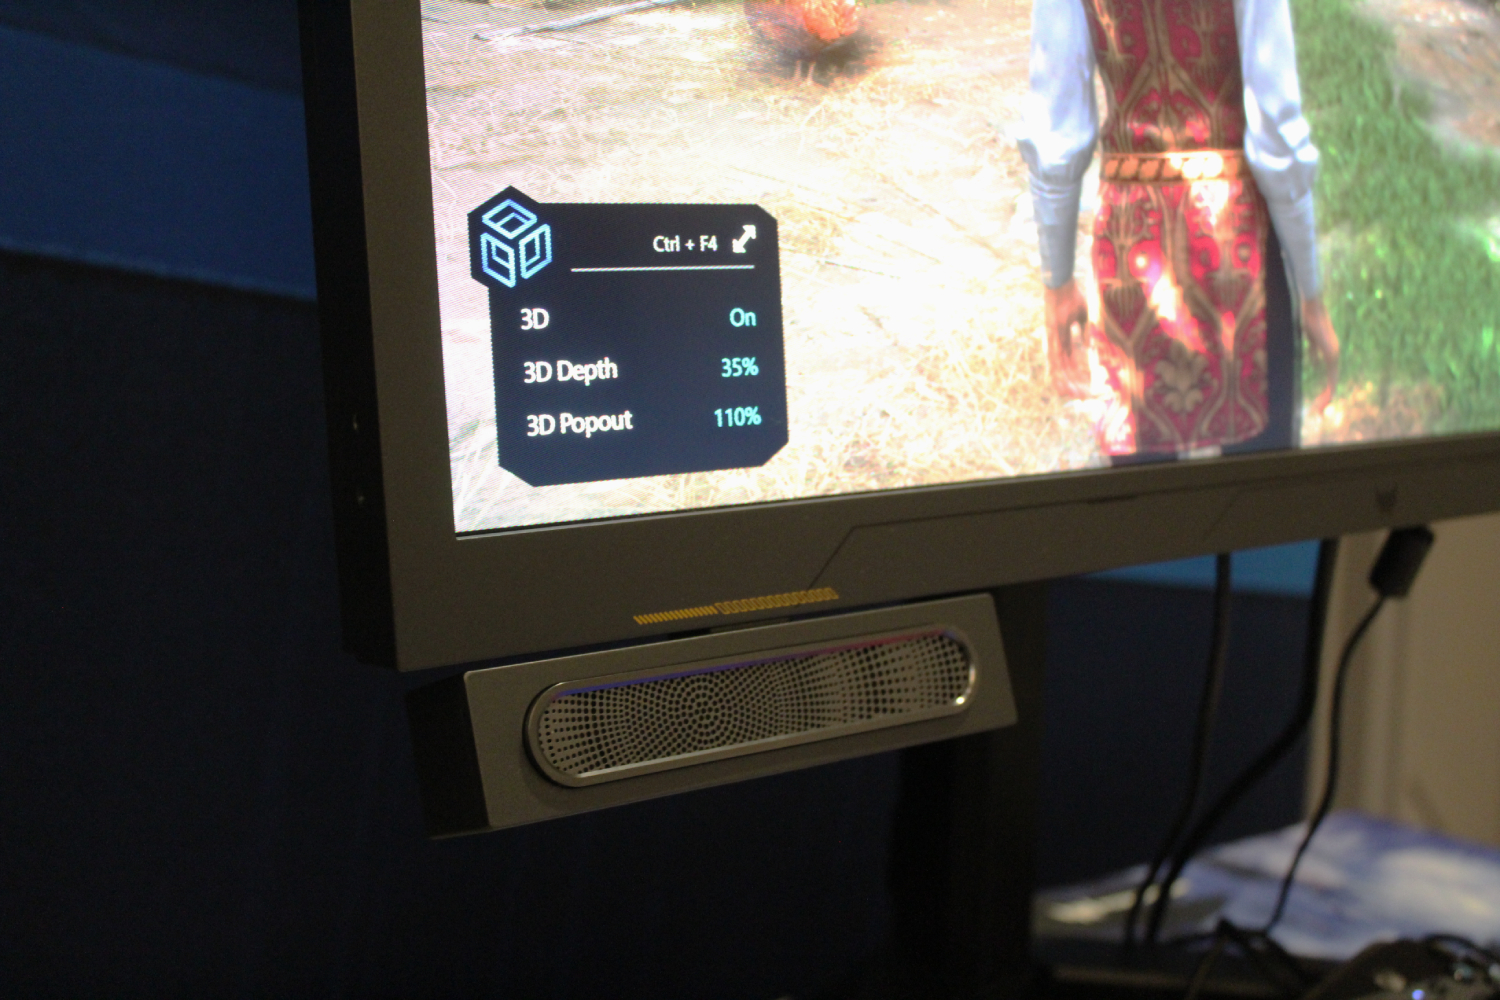 The 3D settings on the Predator SpatialLabs View 3D monitor.